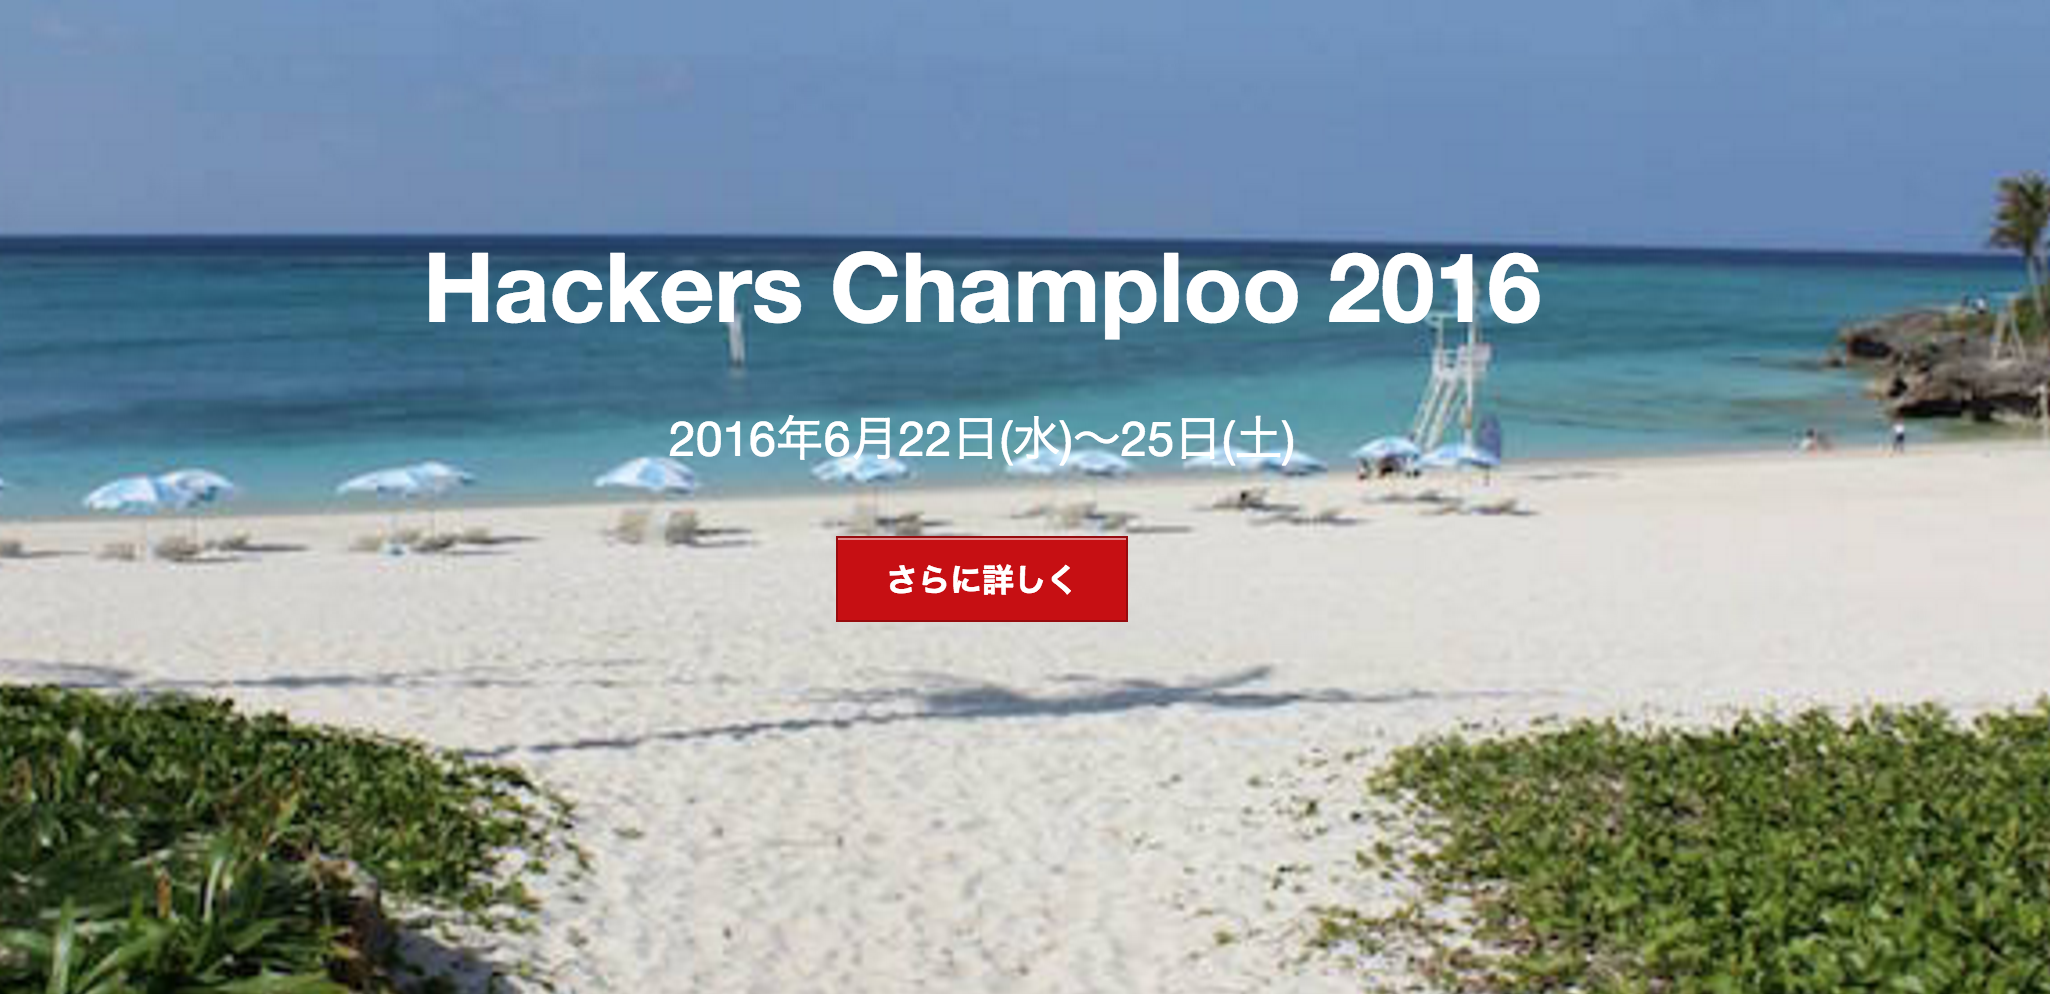 http://hackers-champloo.org/2016/